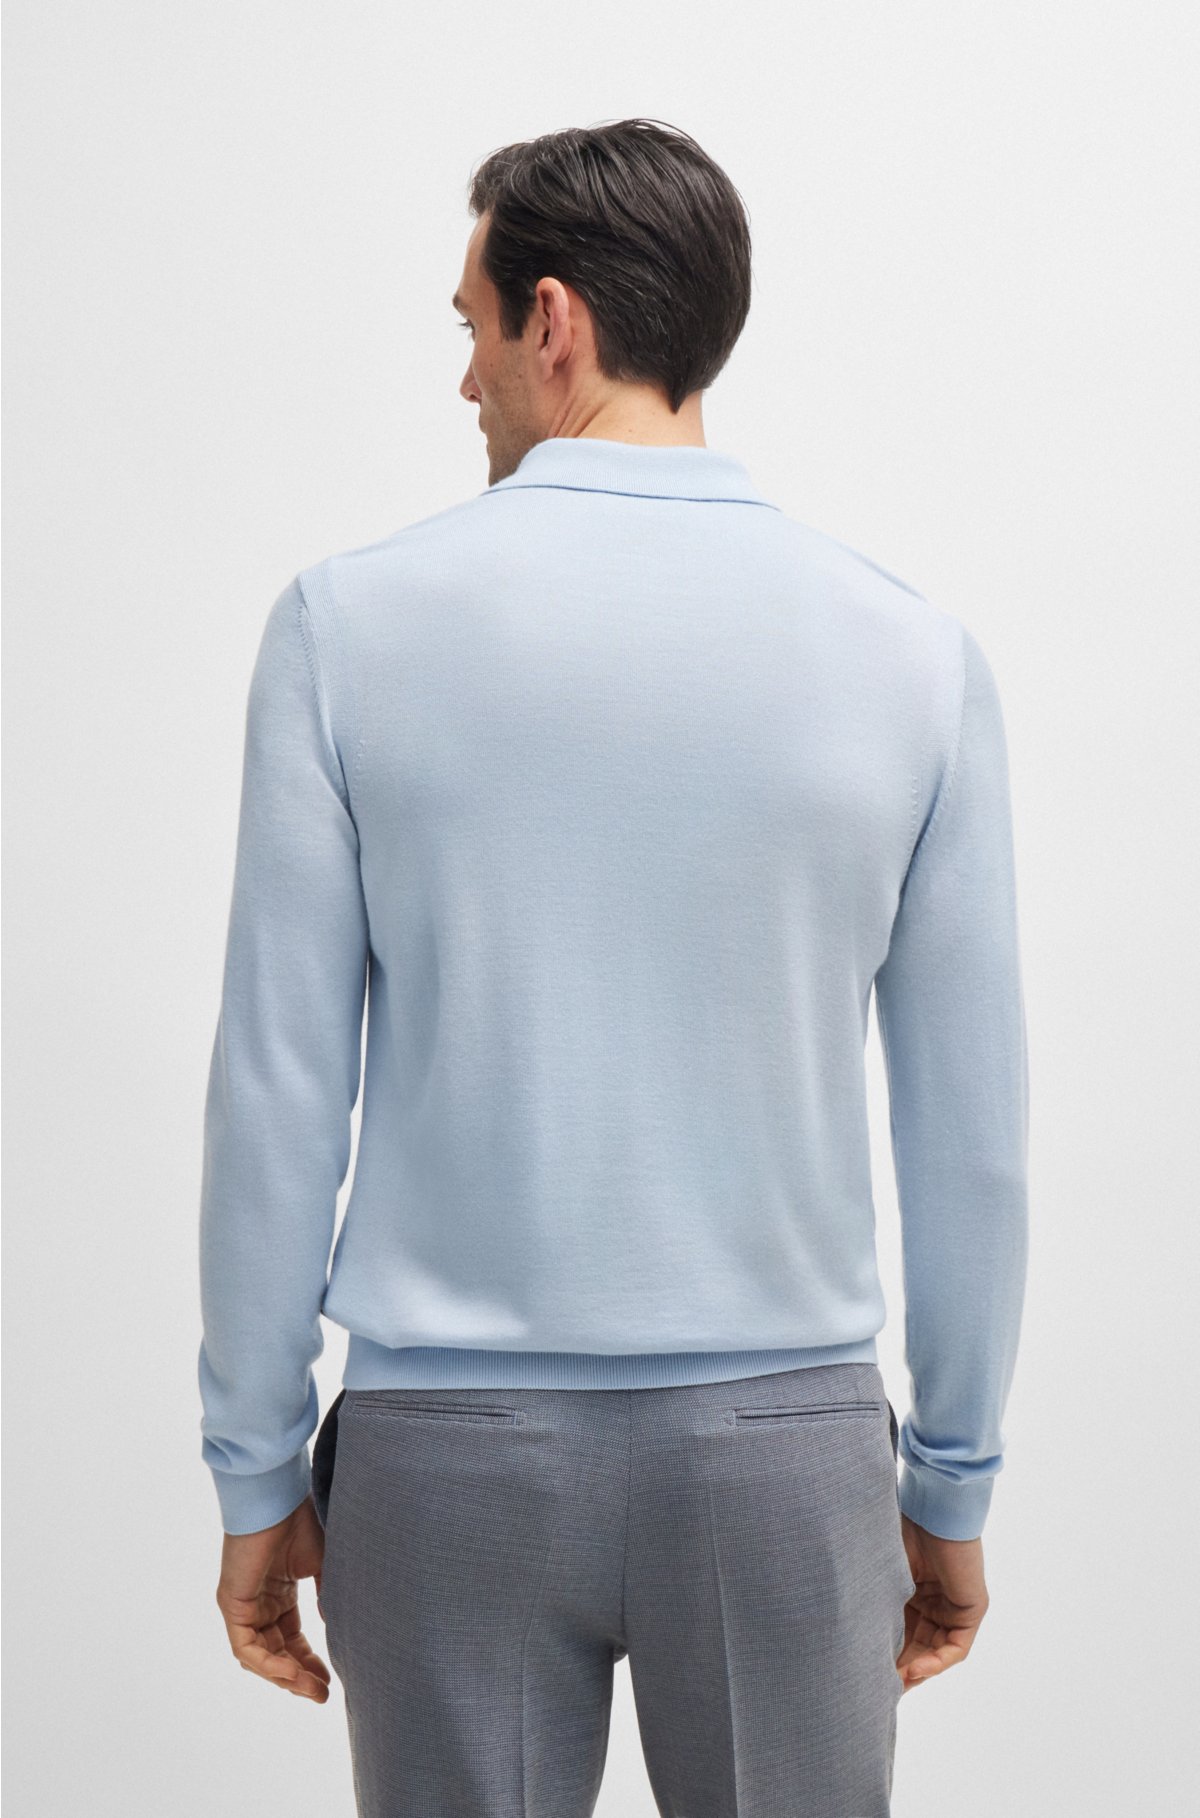 Regular-fit polo sweater in wool, silk and cashmere, Light Blue